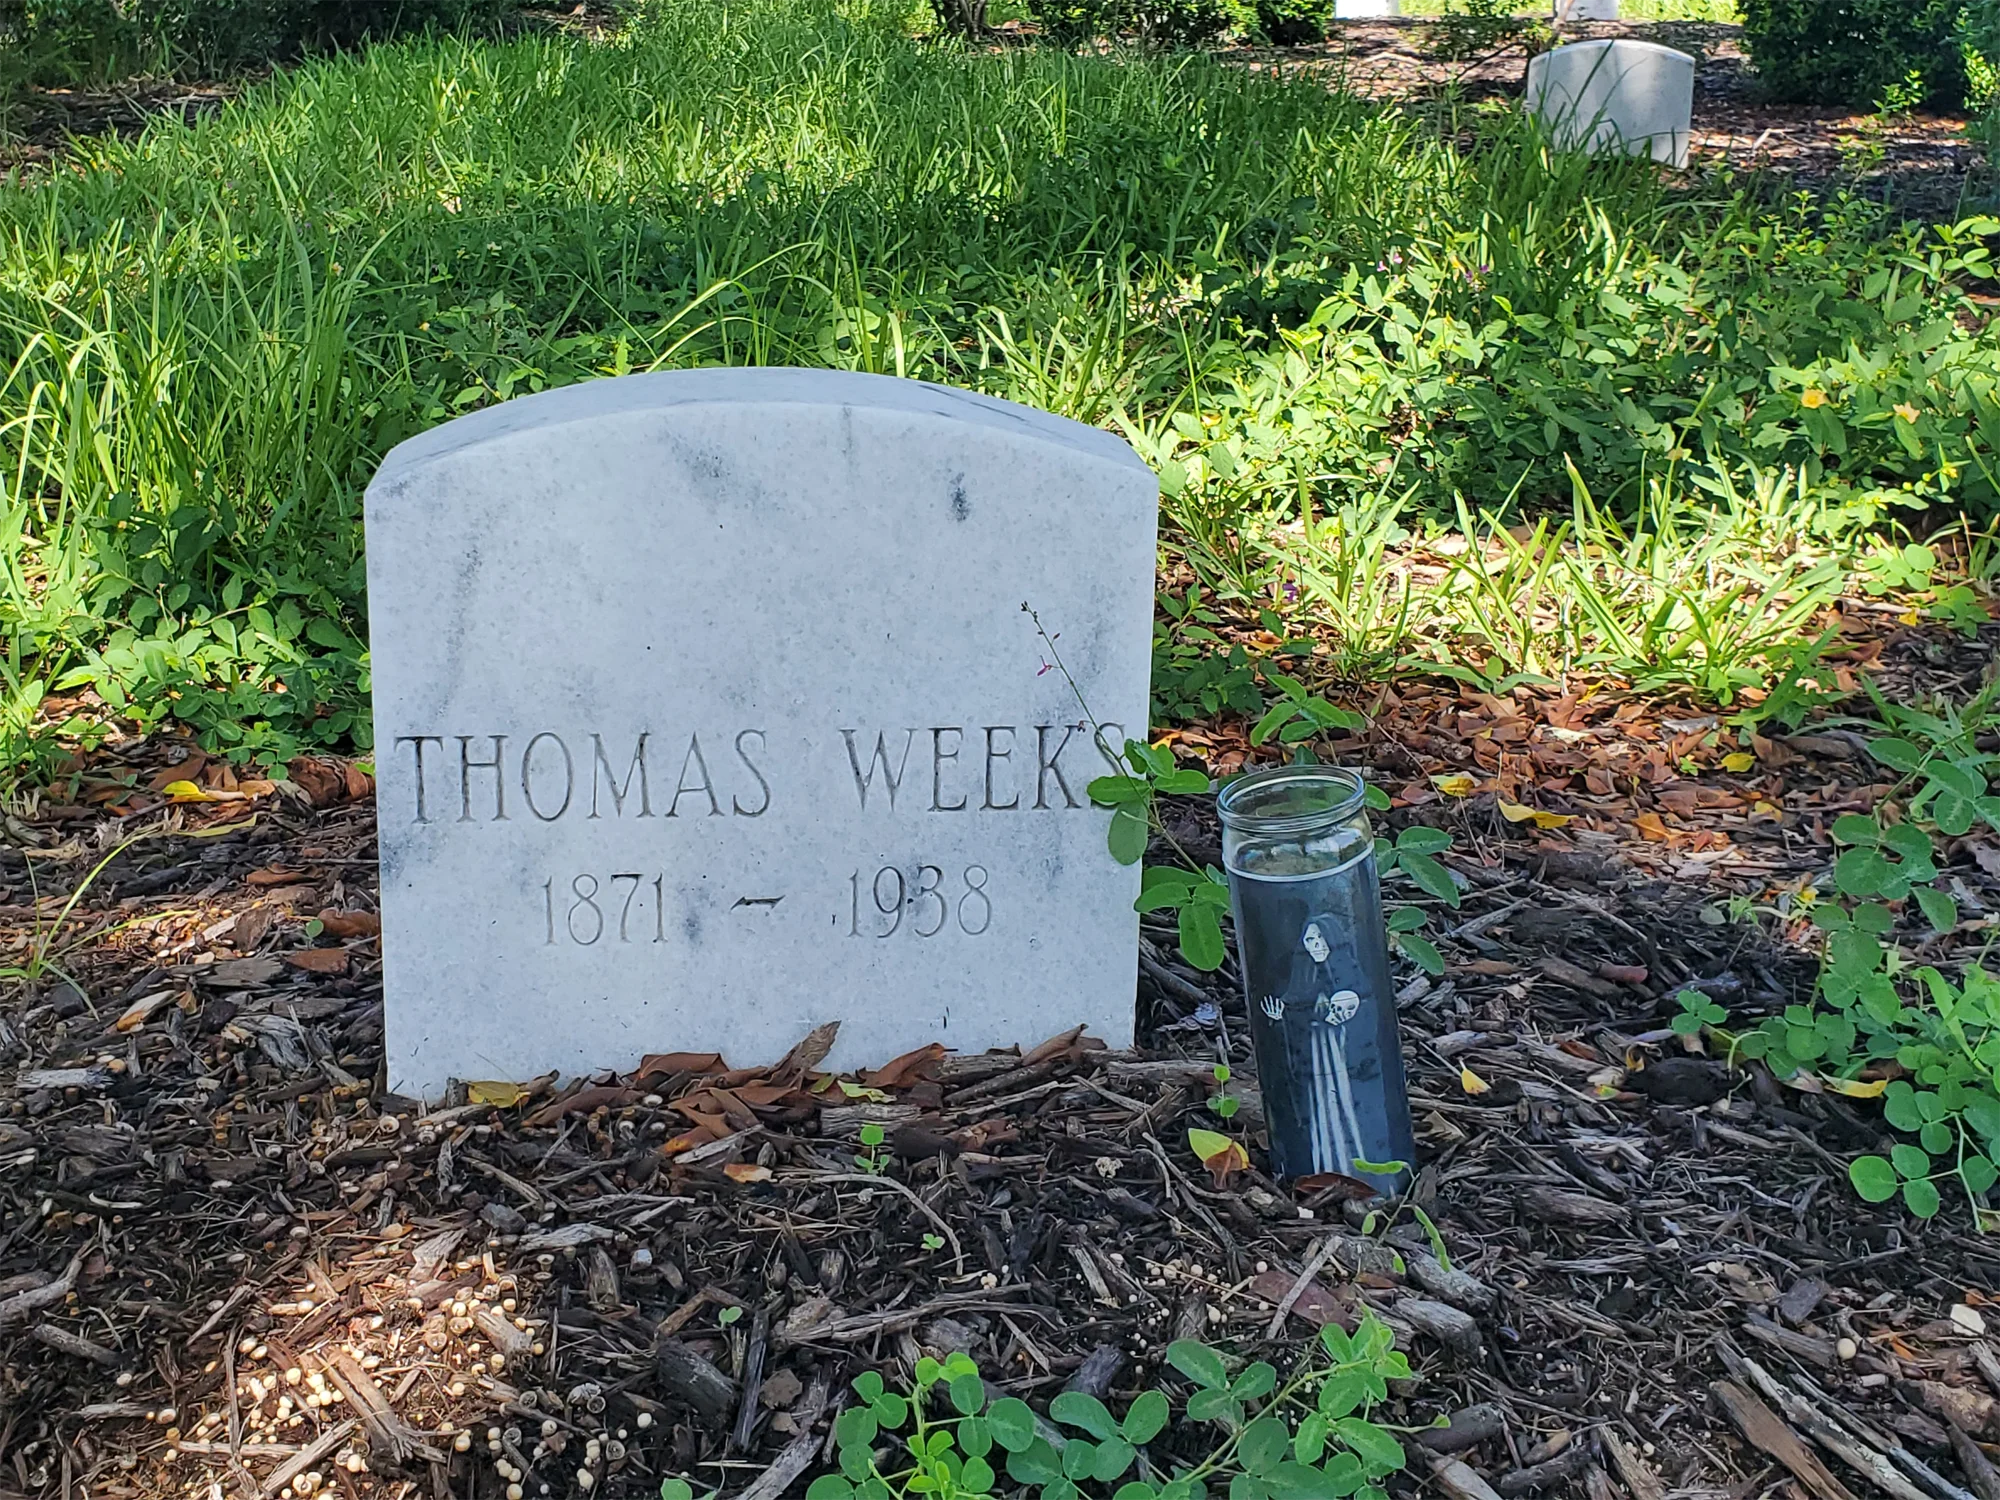 Gravestone on dirt and a tall black candle sporting a Grim Reaper graphic